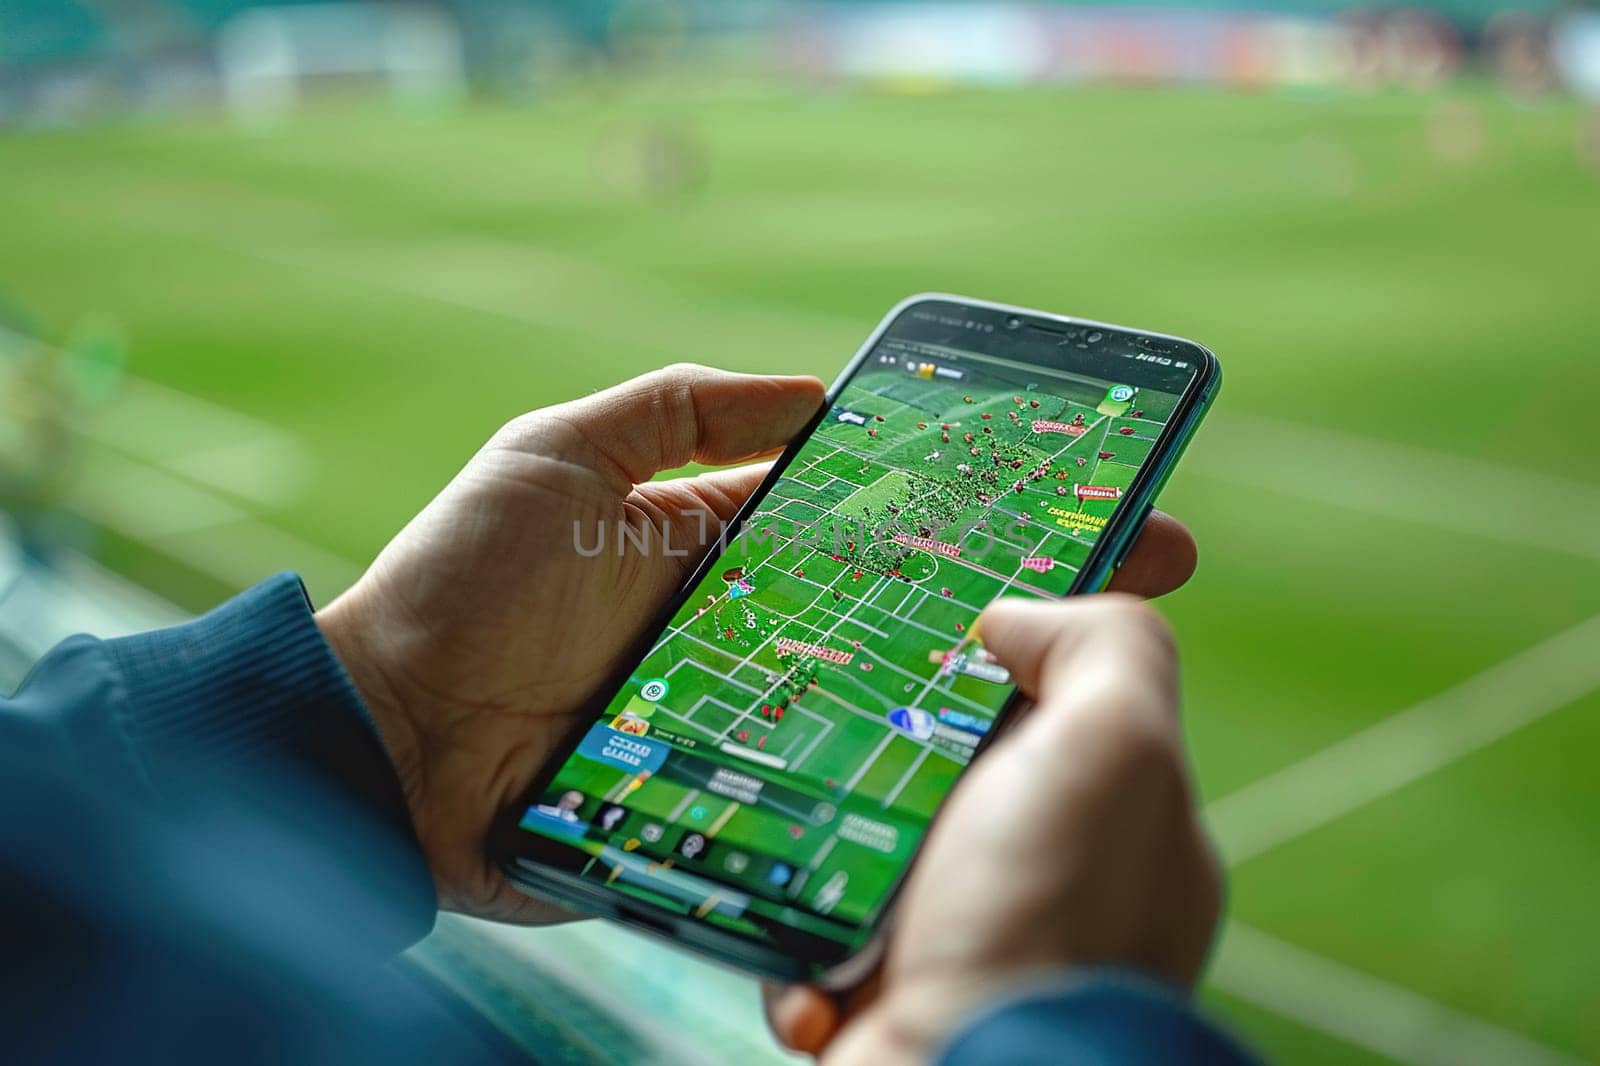 A man with a mobile phone in his hands watches an online football broadcast at the stadium. Concept of sports applications on mobile devices.